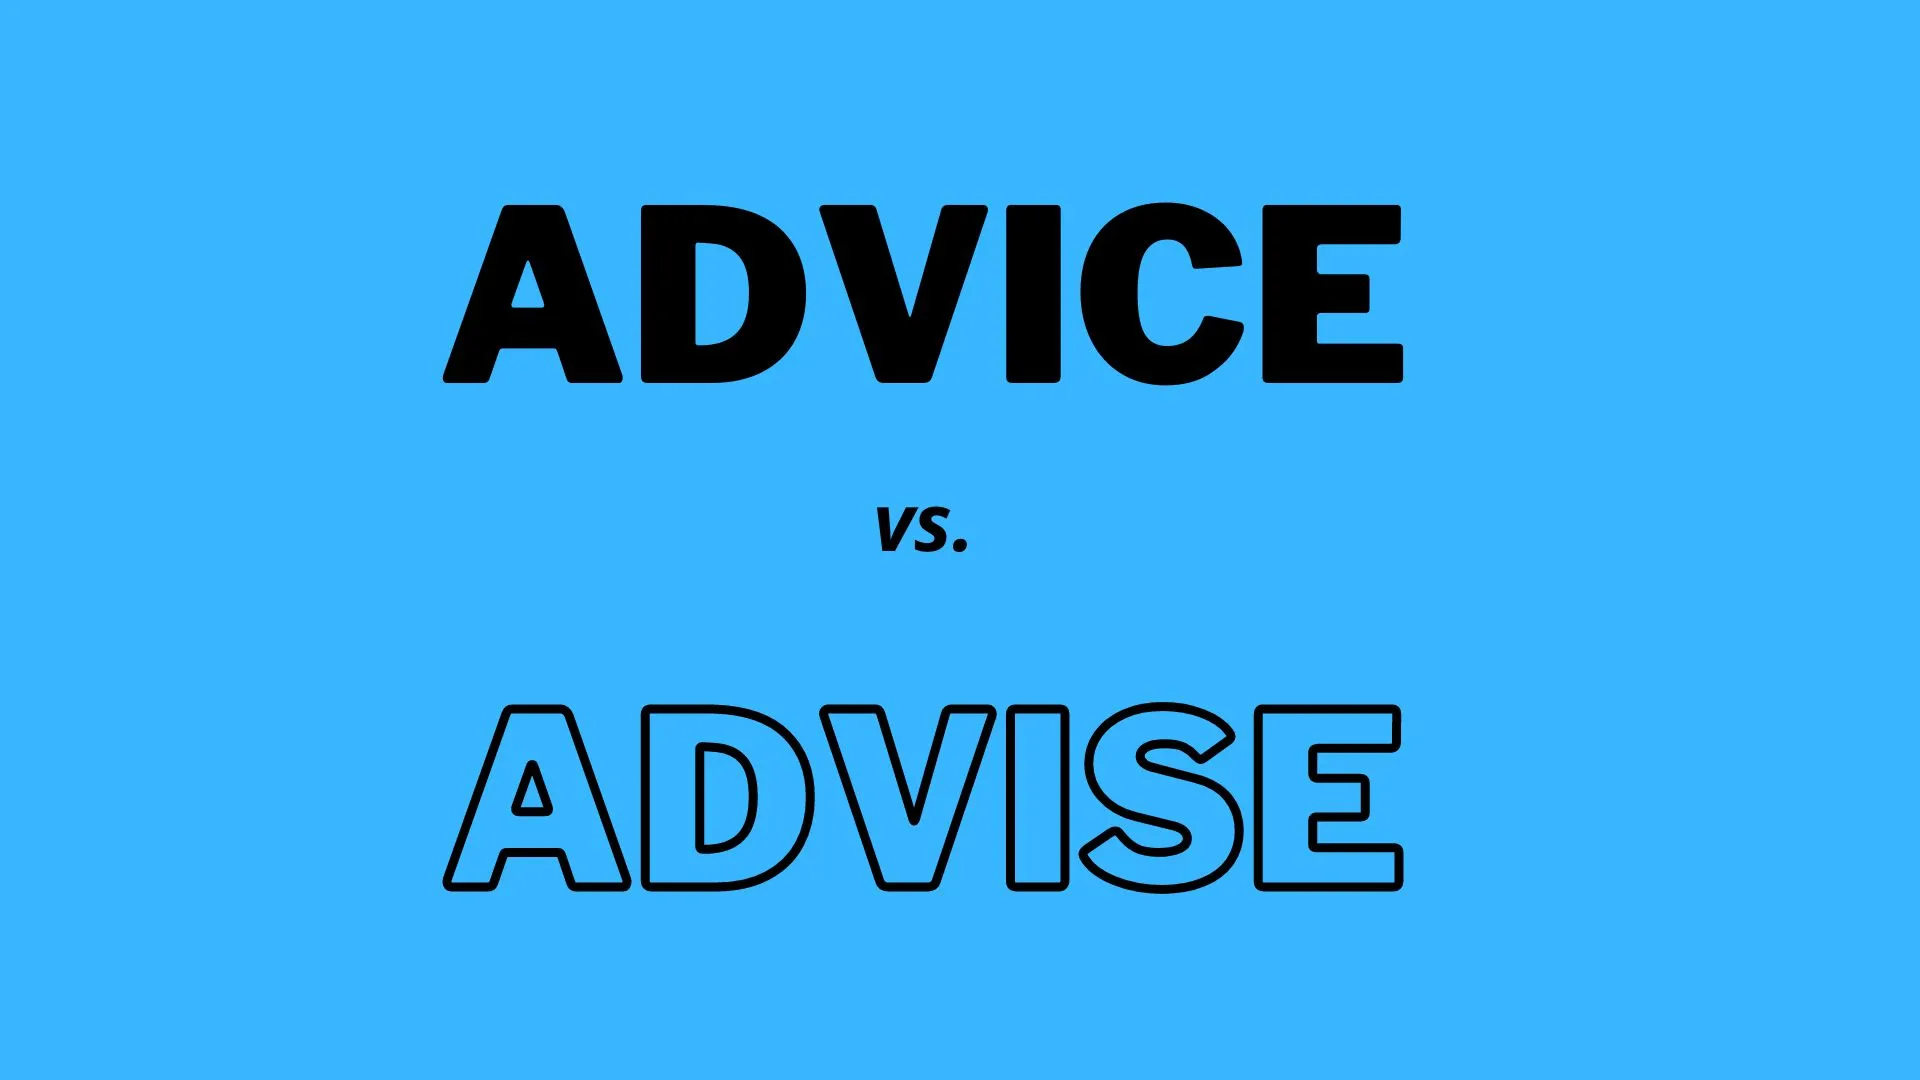 Visual comparison and definitions of words  "Advice " and  "Advise "